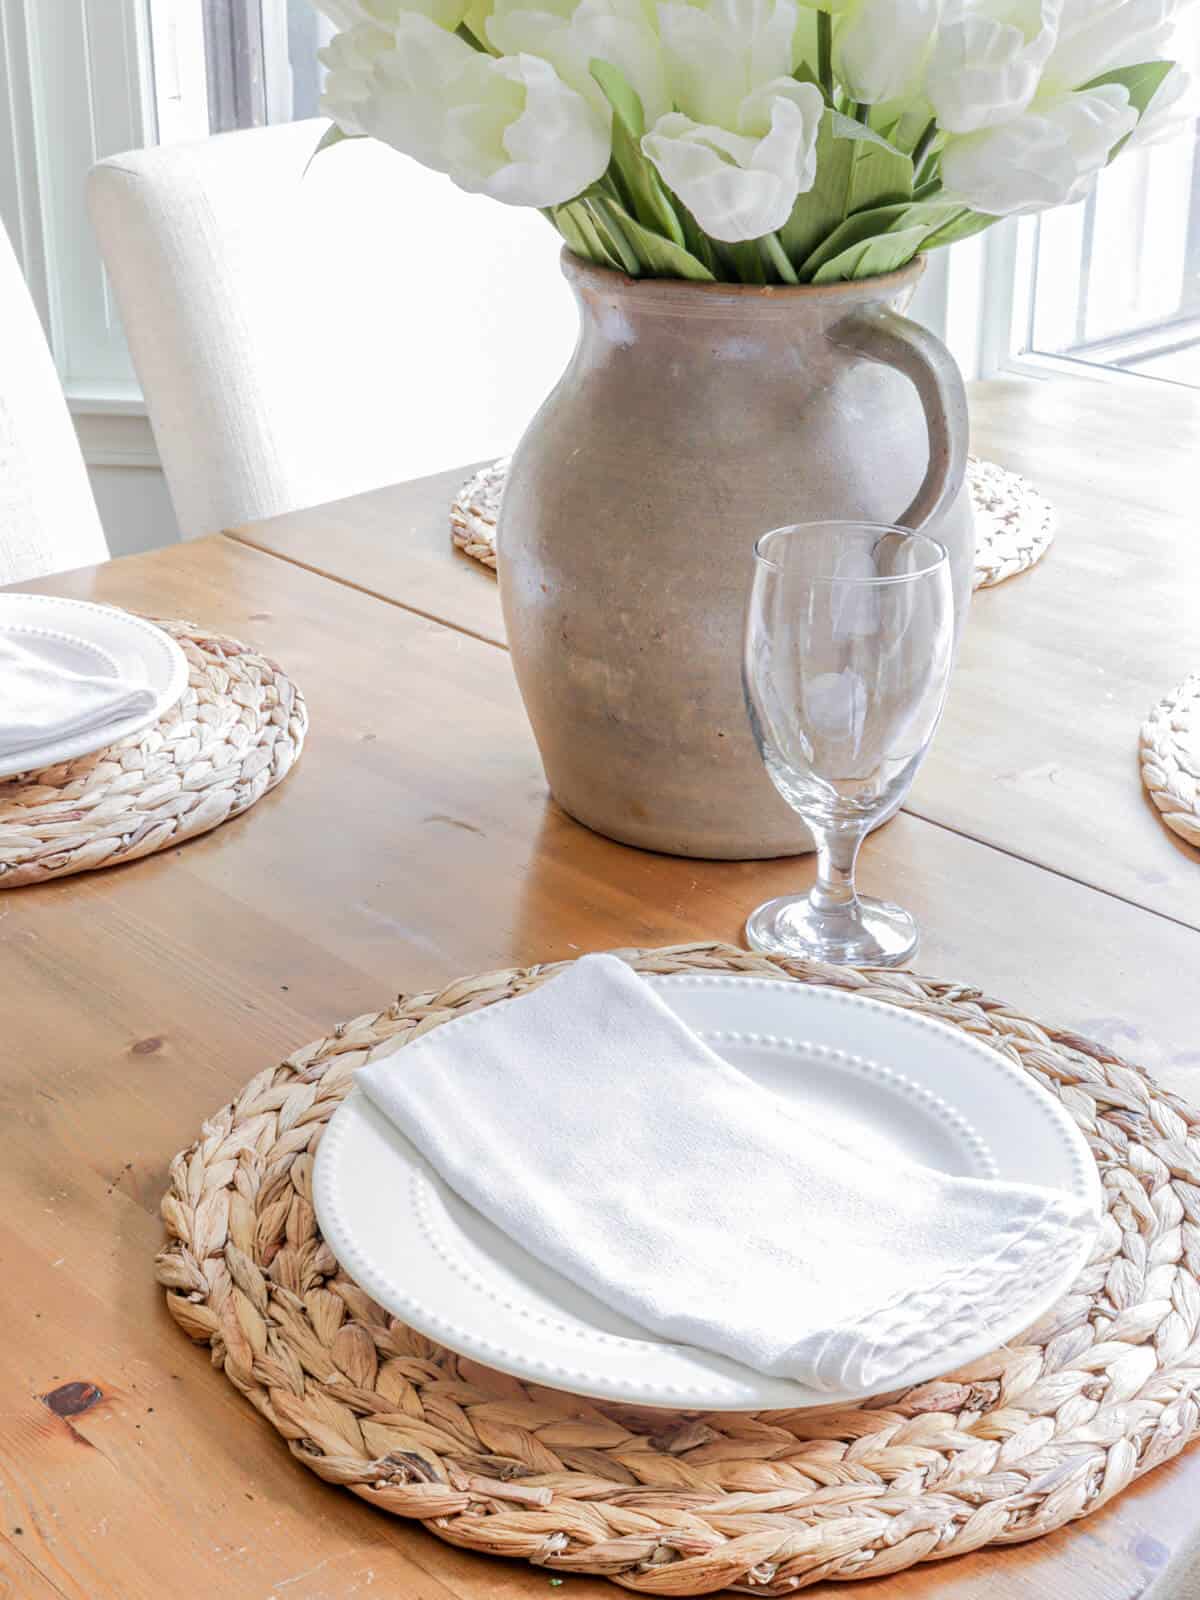 simple summer table setting with woven mats white plates and napkins with a vintage crock filled with tulips